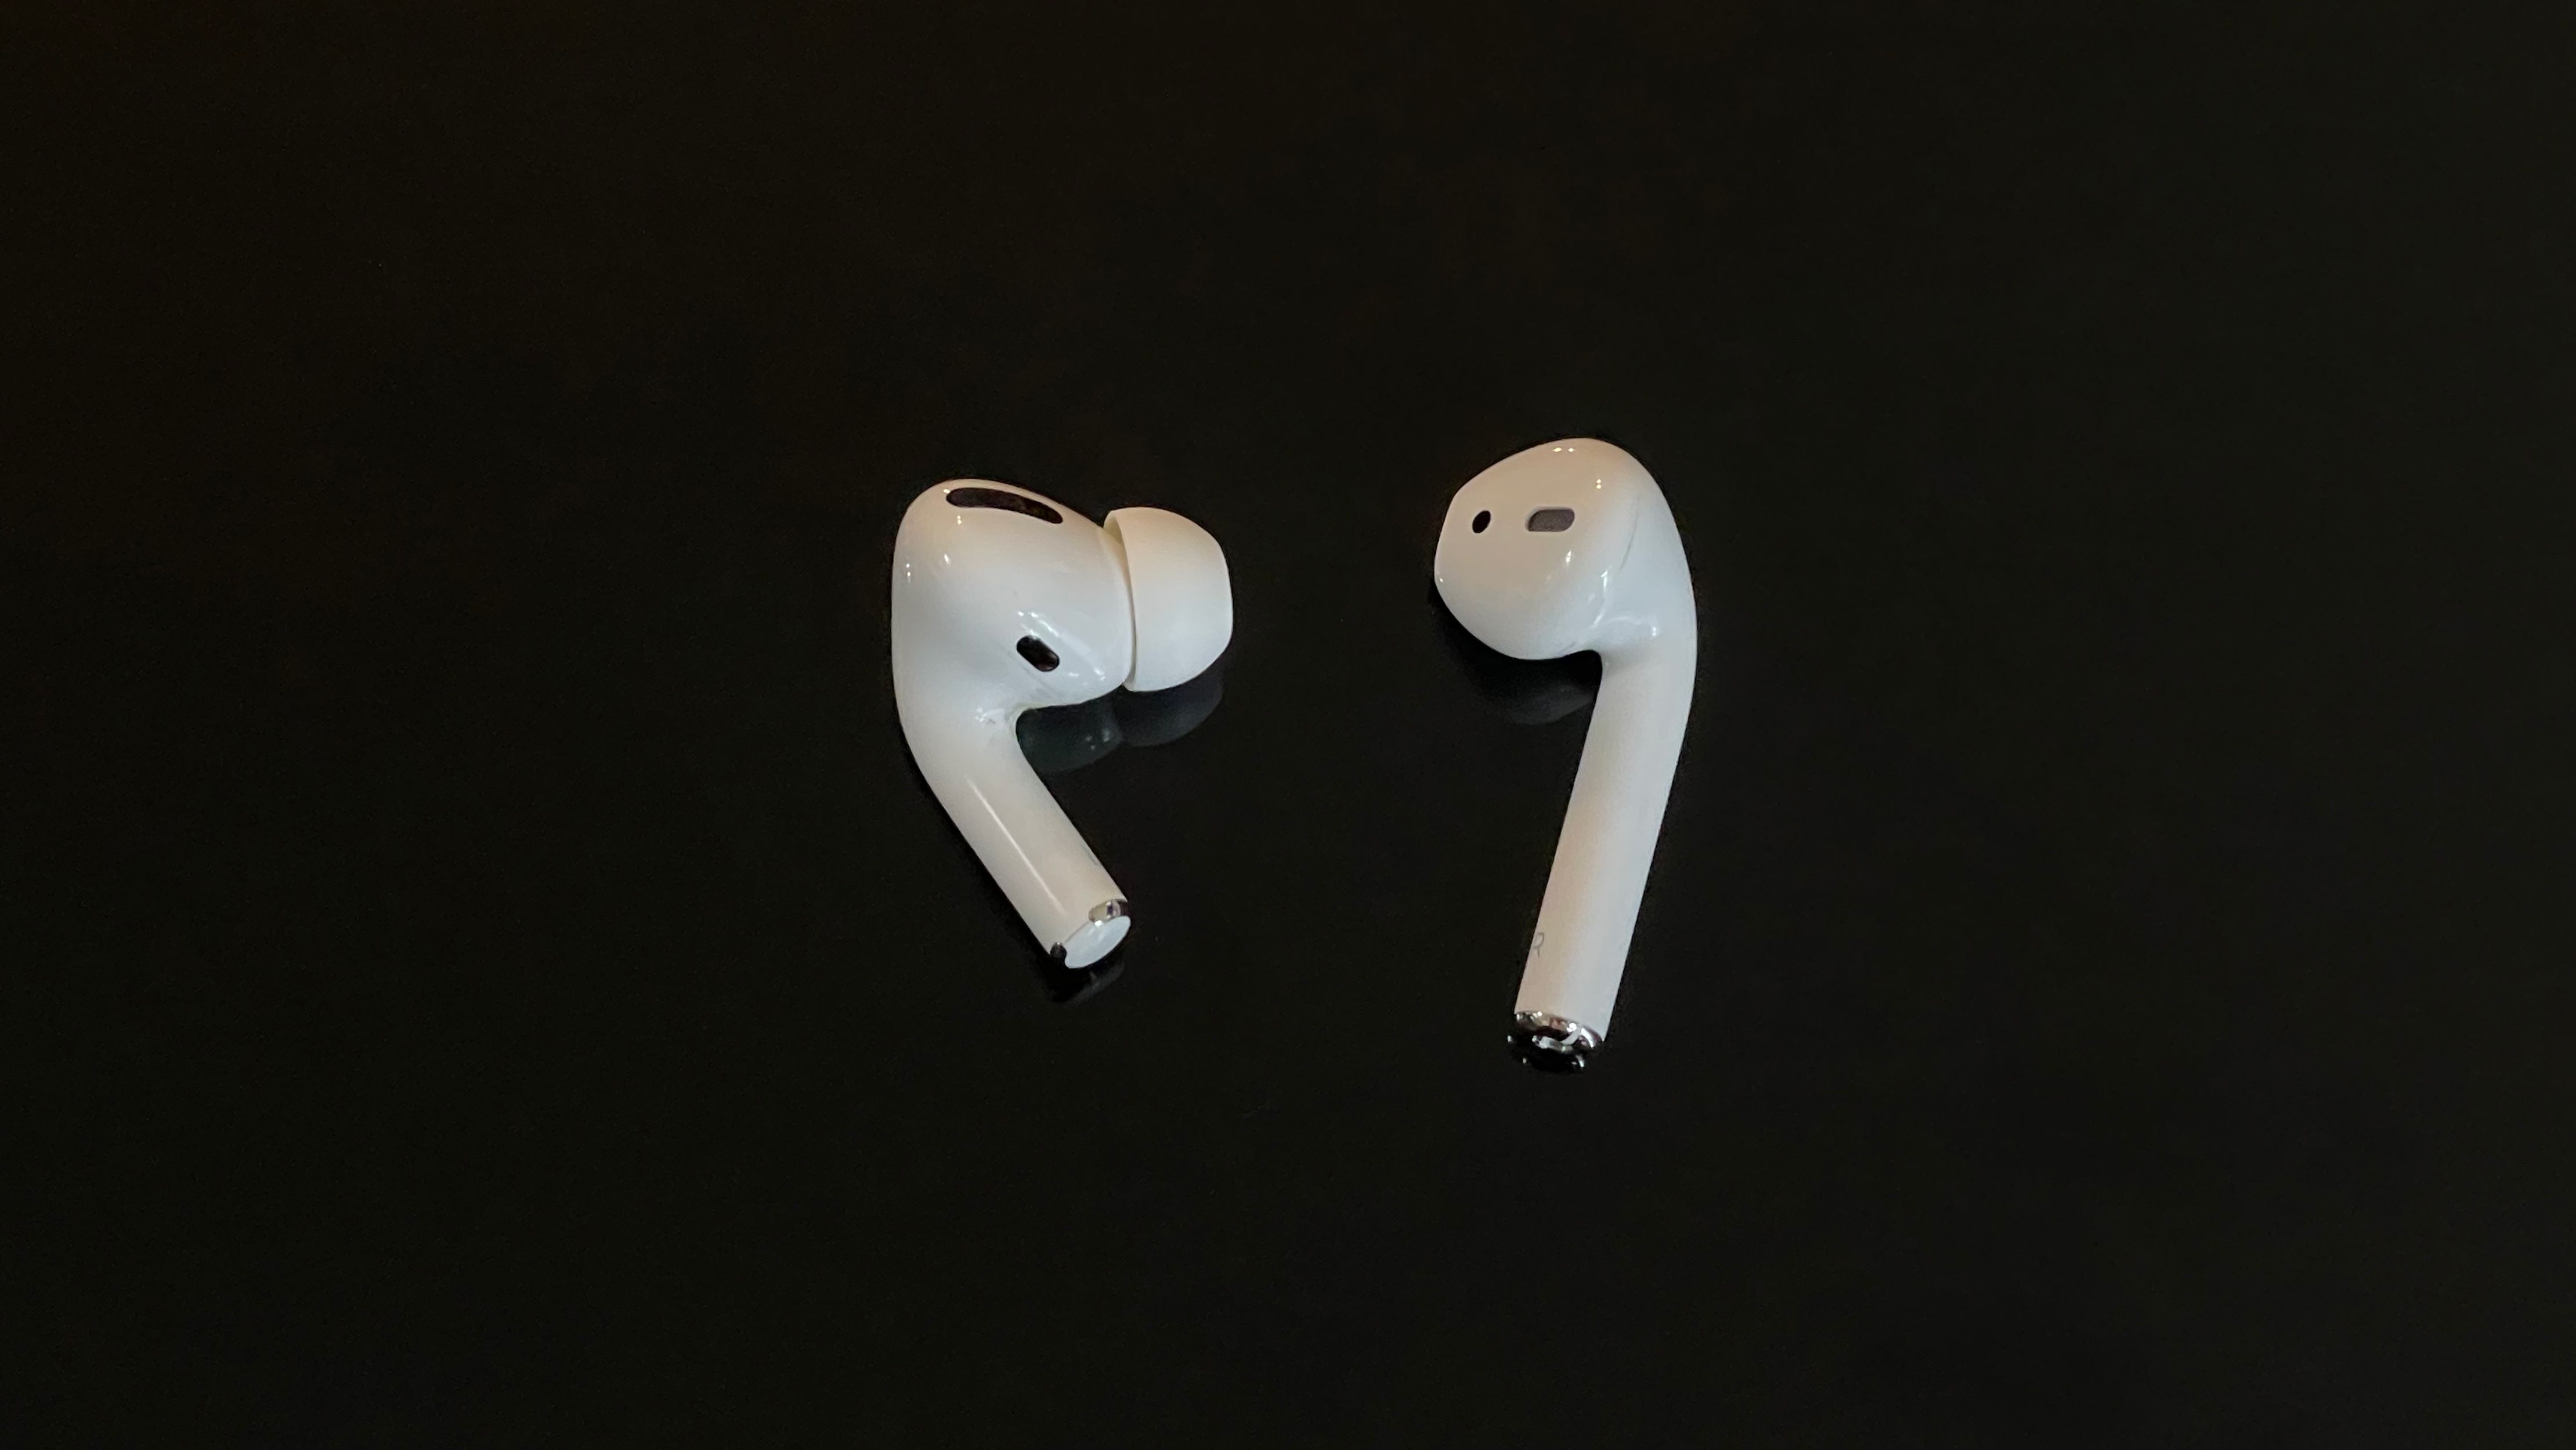 Genuine Apple AirPod Pro (1st Gen) Replacement Parts Right Left AirPods or  Case